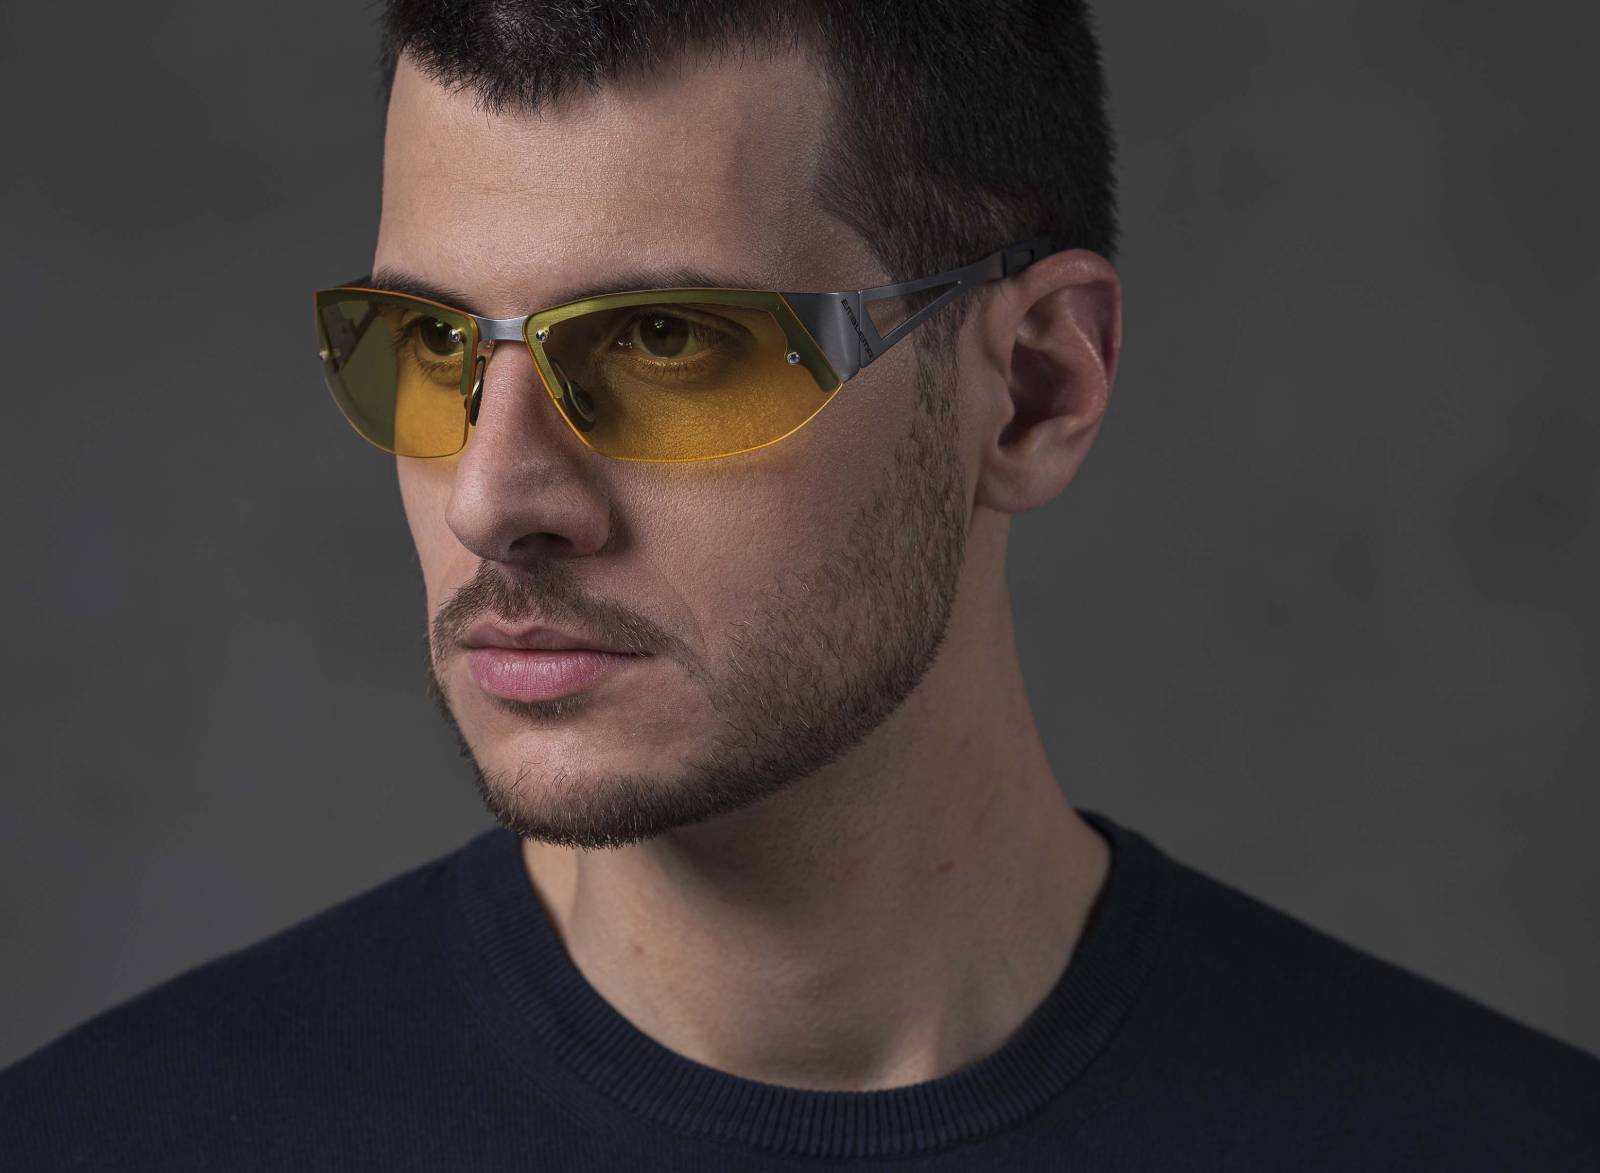 Glasses with yellow lenses